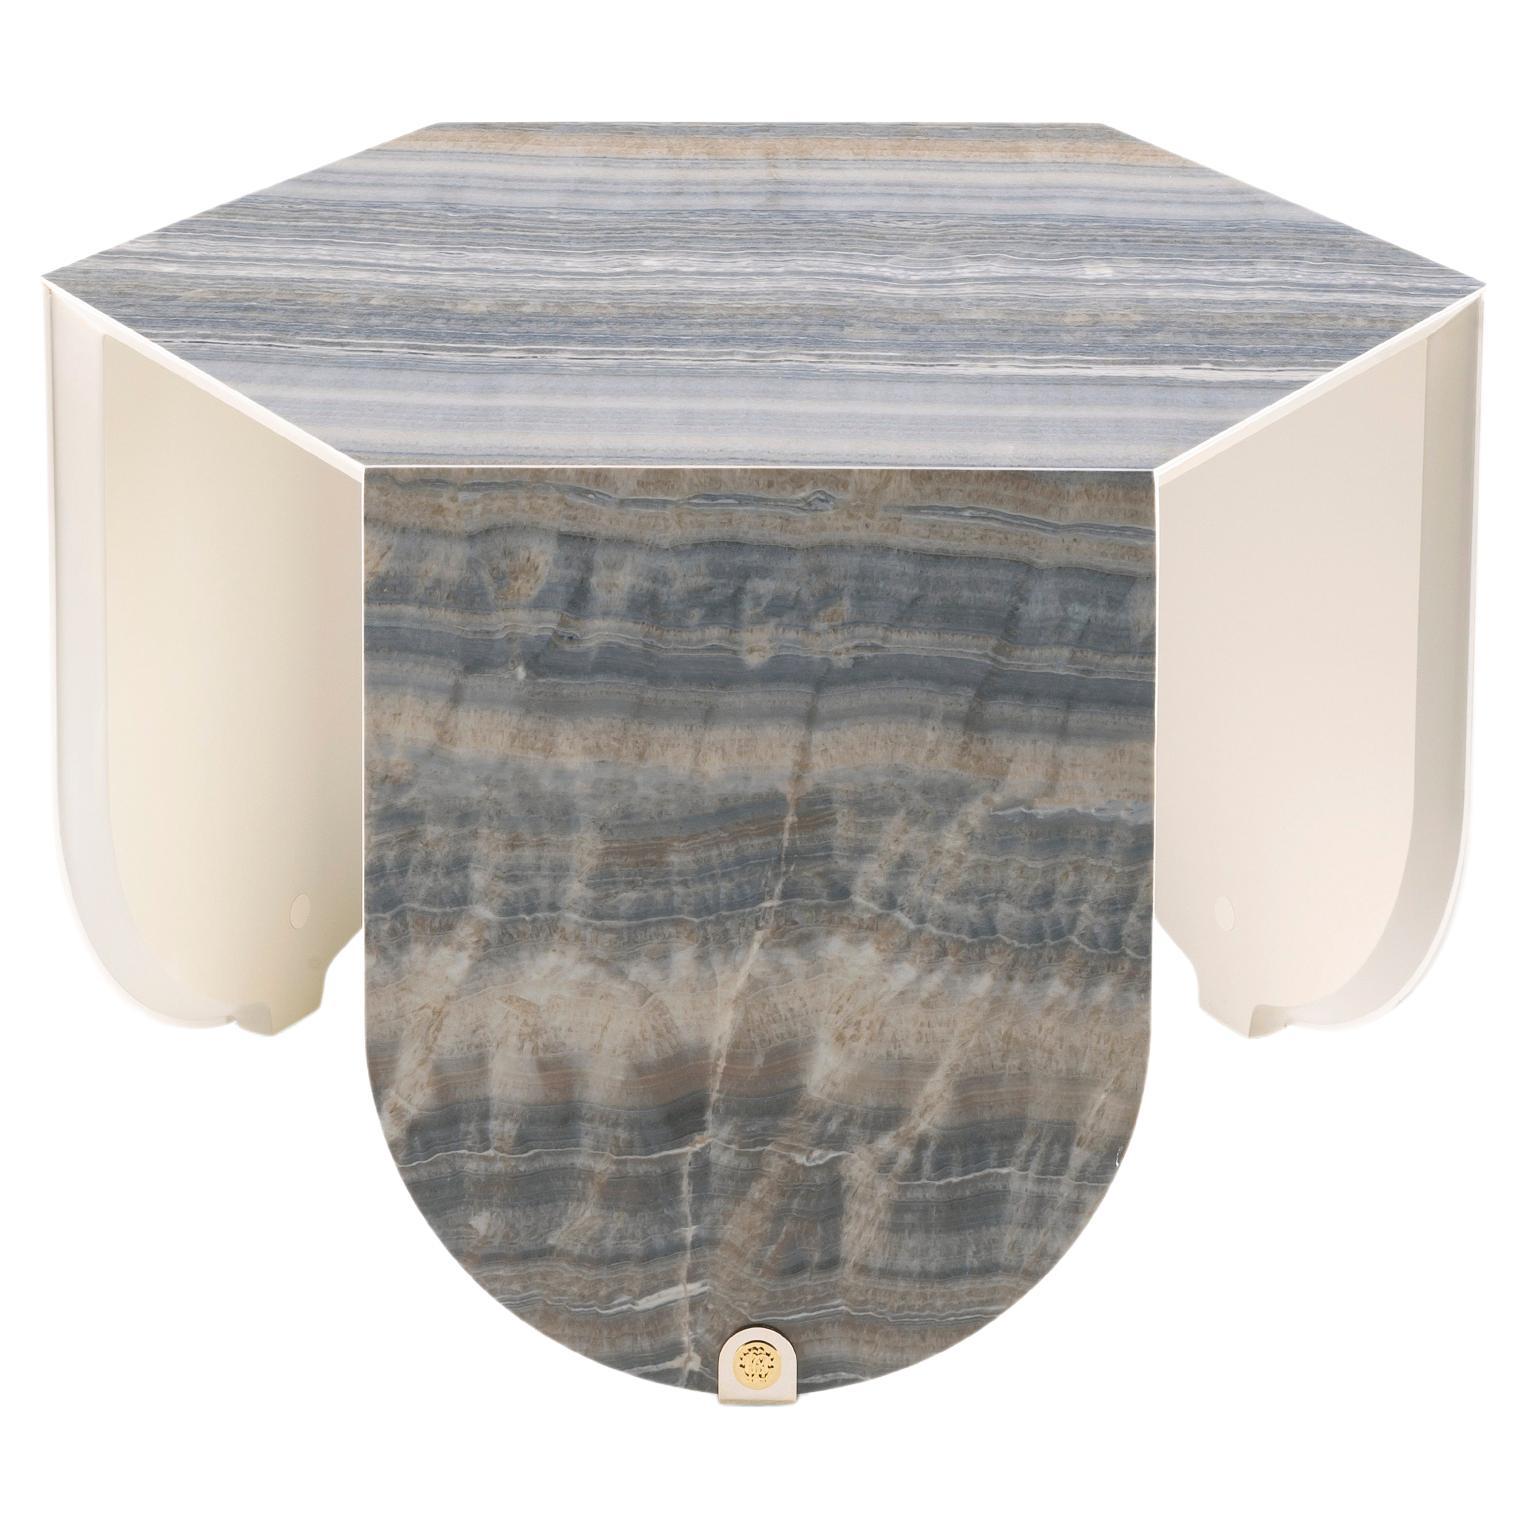 21st Century Inagua Side Table in Grey Gres by Roberto Cavalli Home Interiors